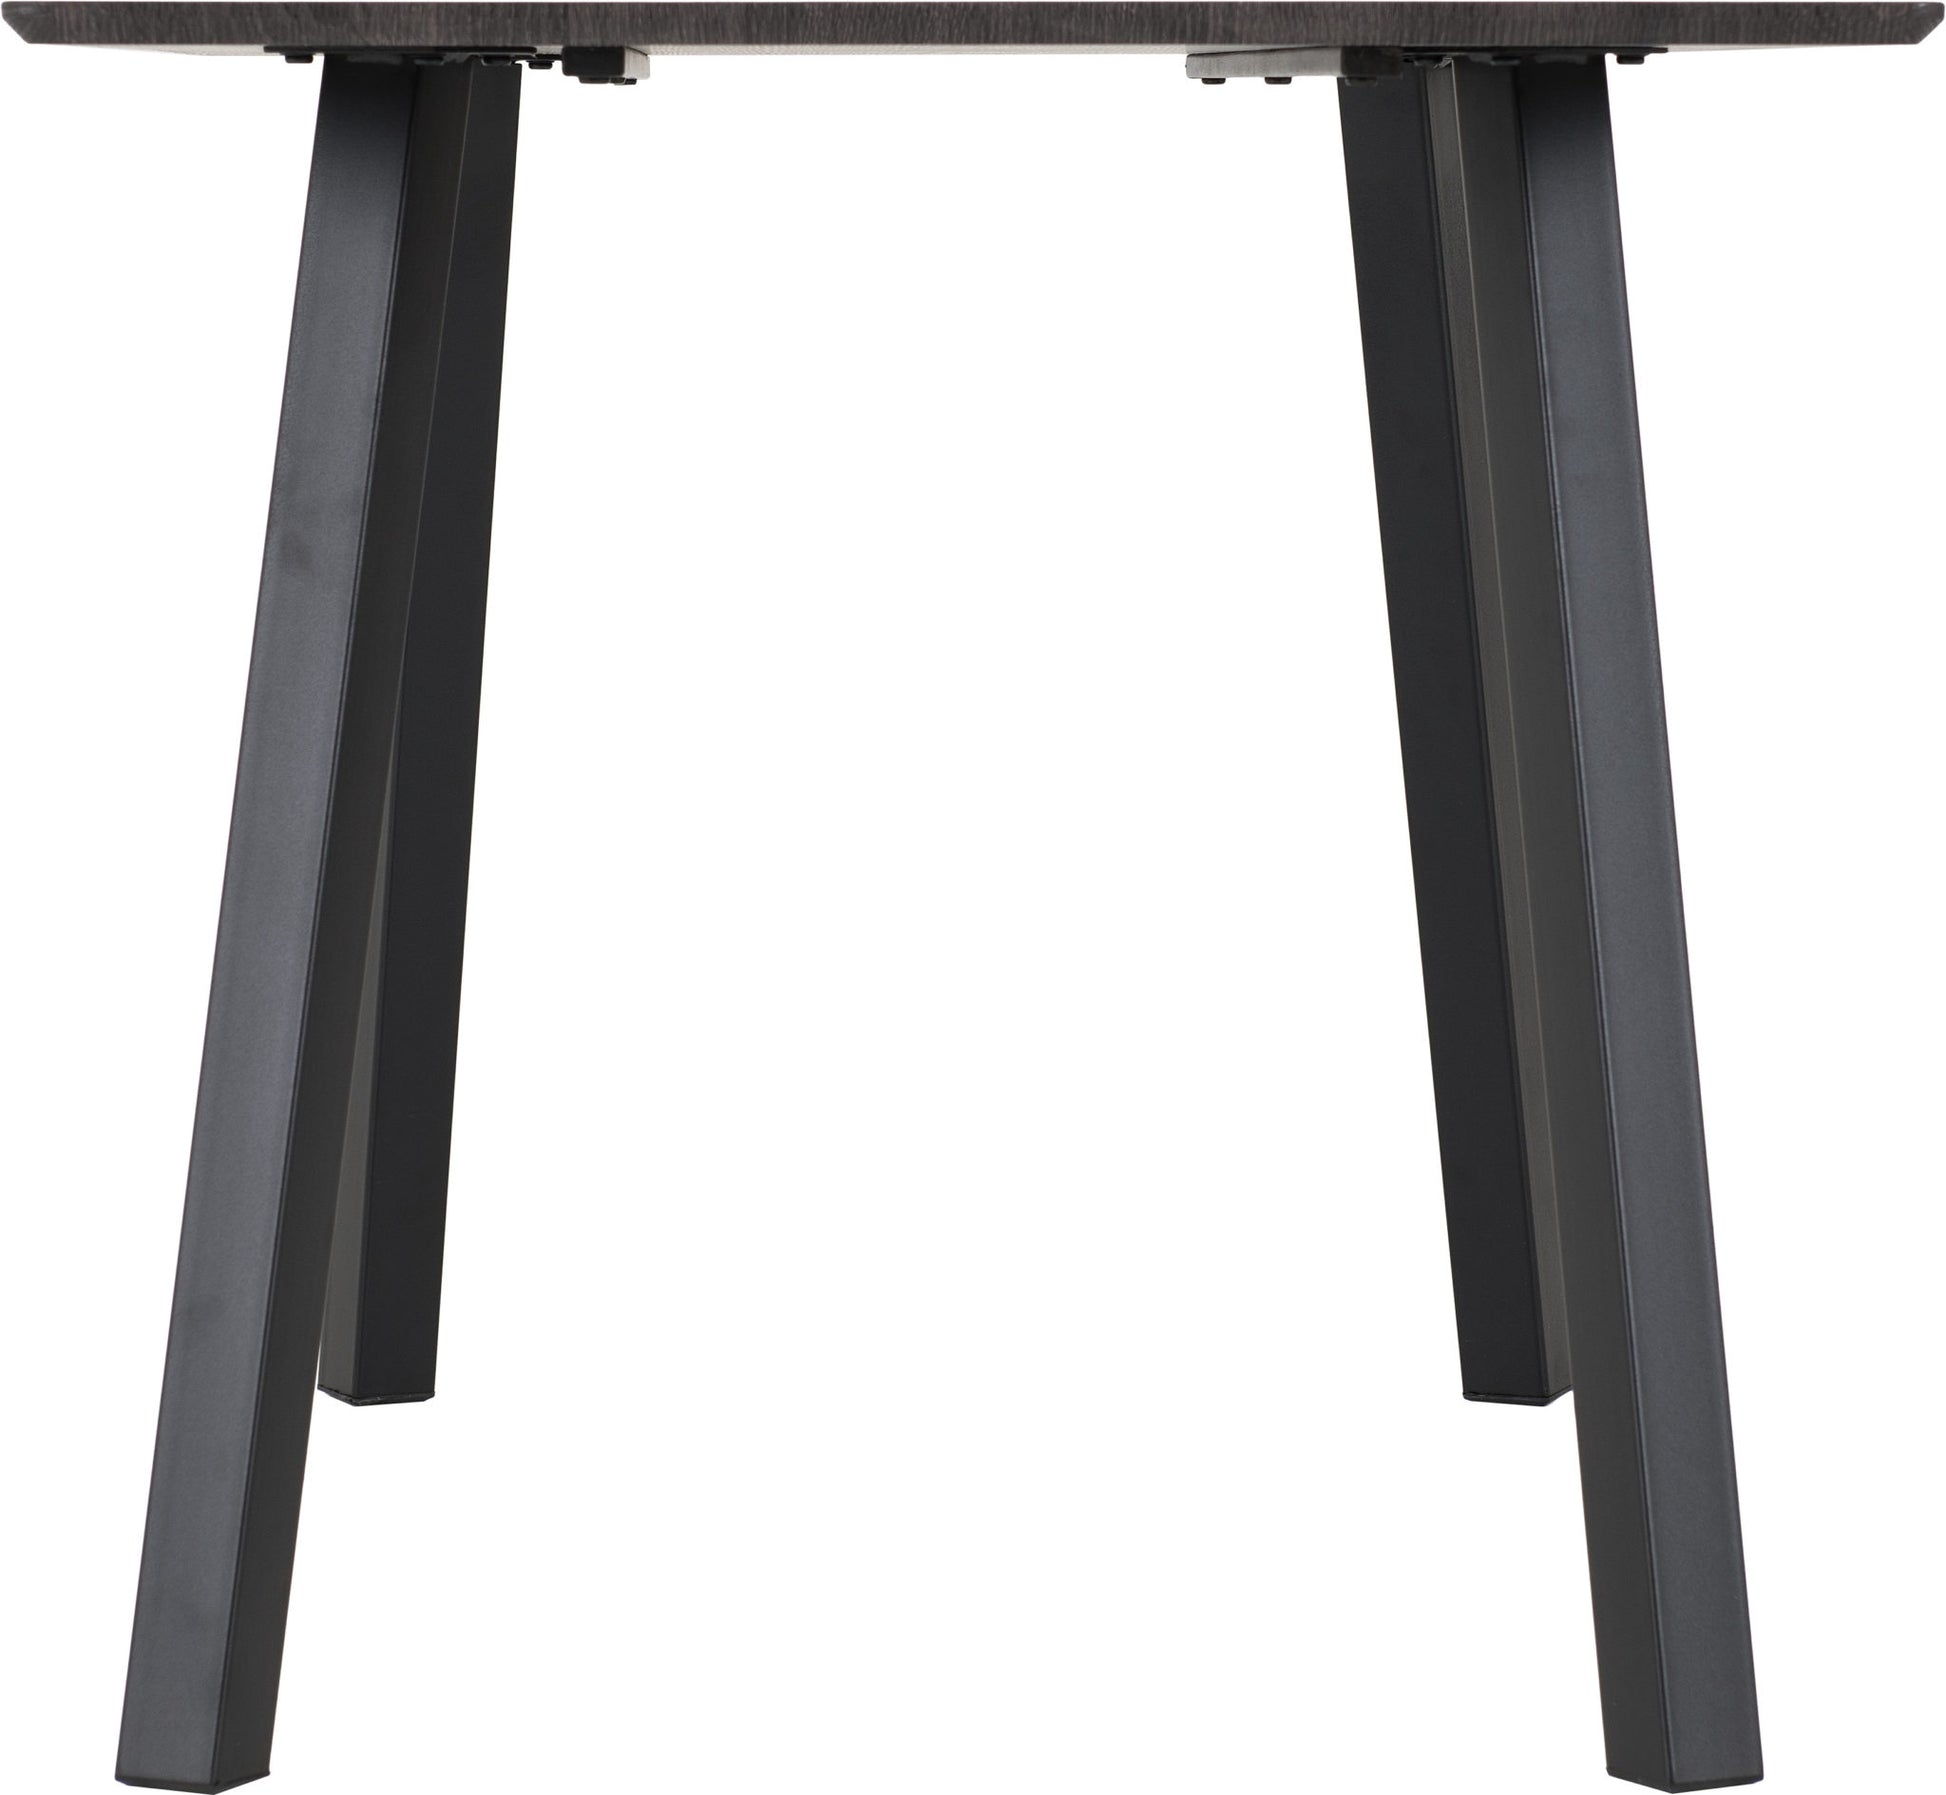 Berlin Dining Table - Black Wood Grain/Black - The Right Buy Store